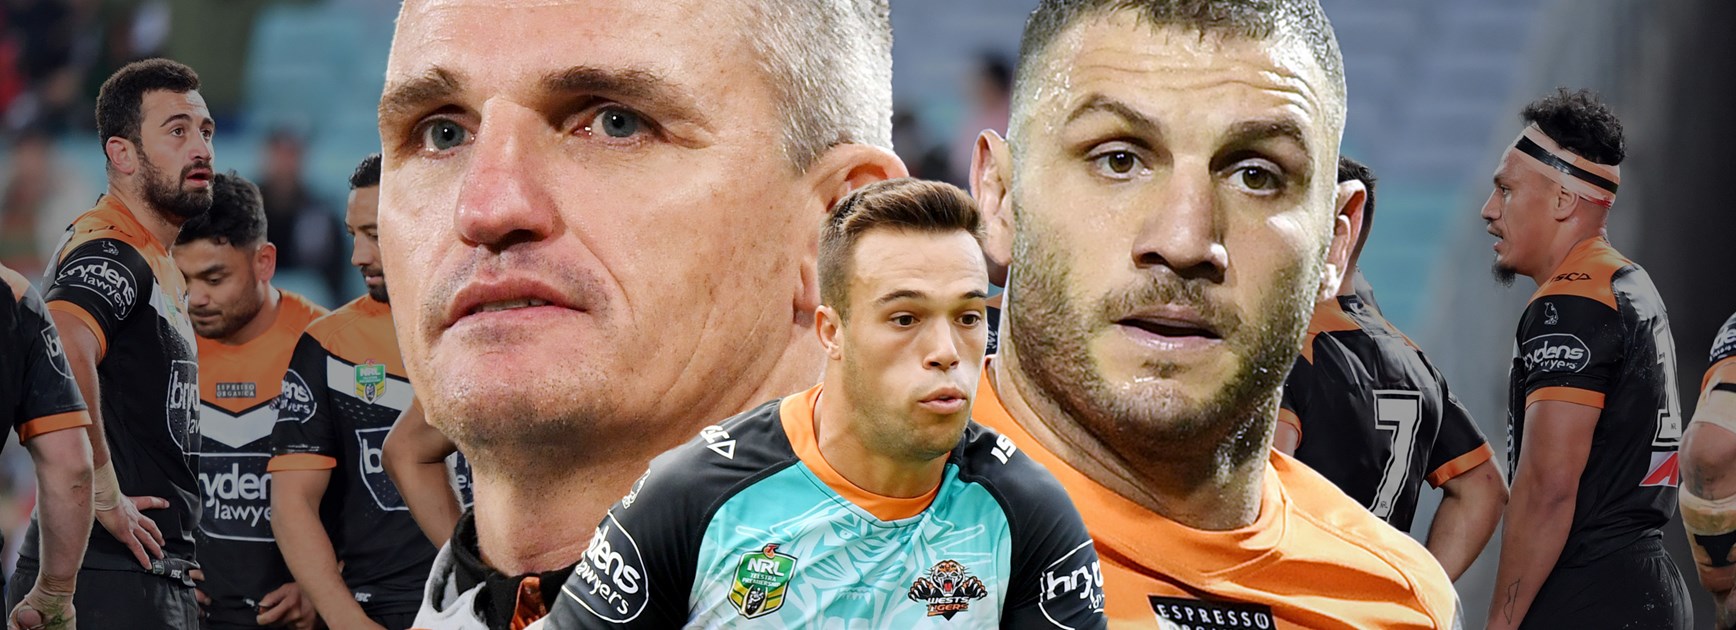 Wests Tigers 2018 season review